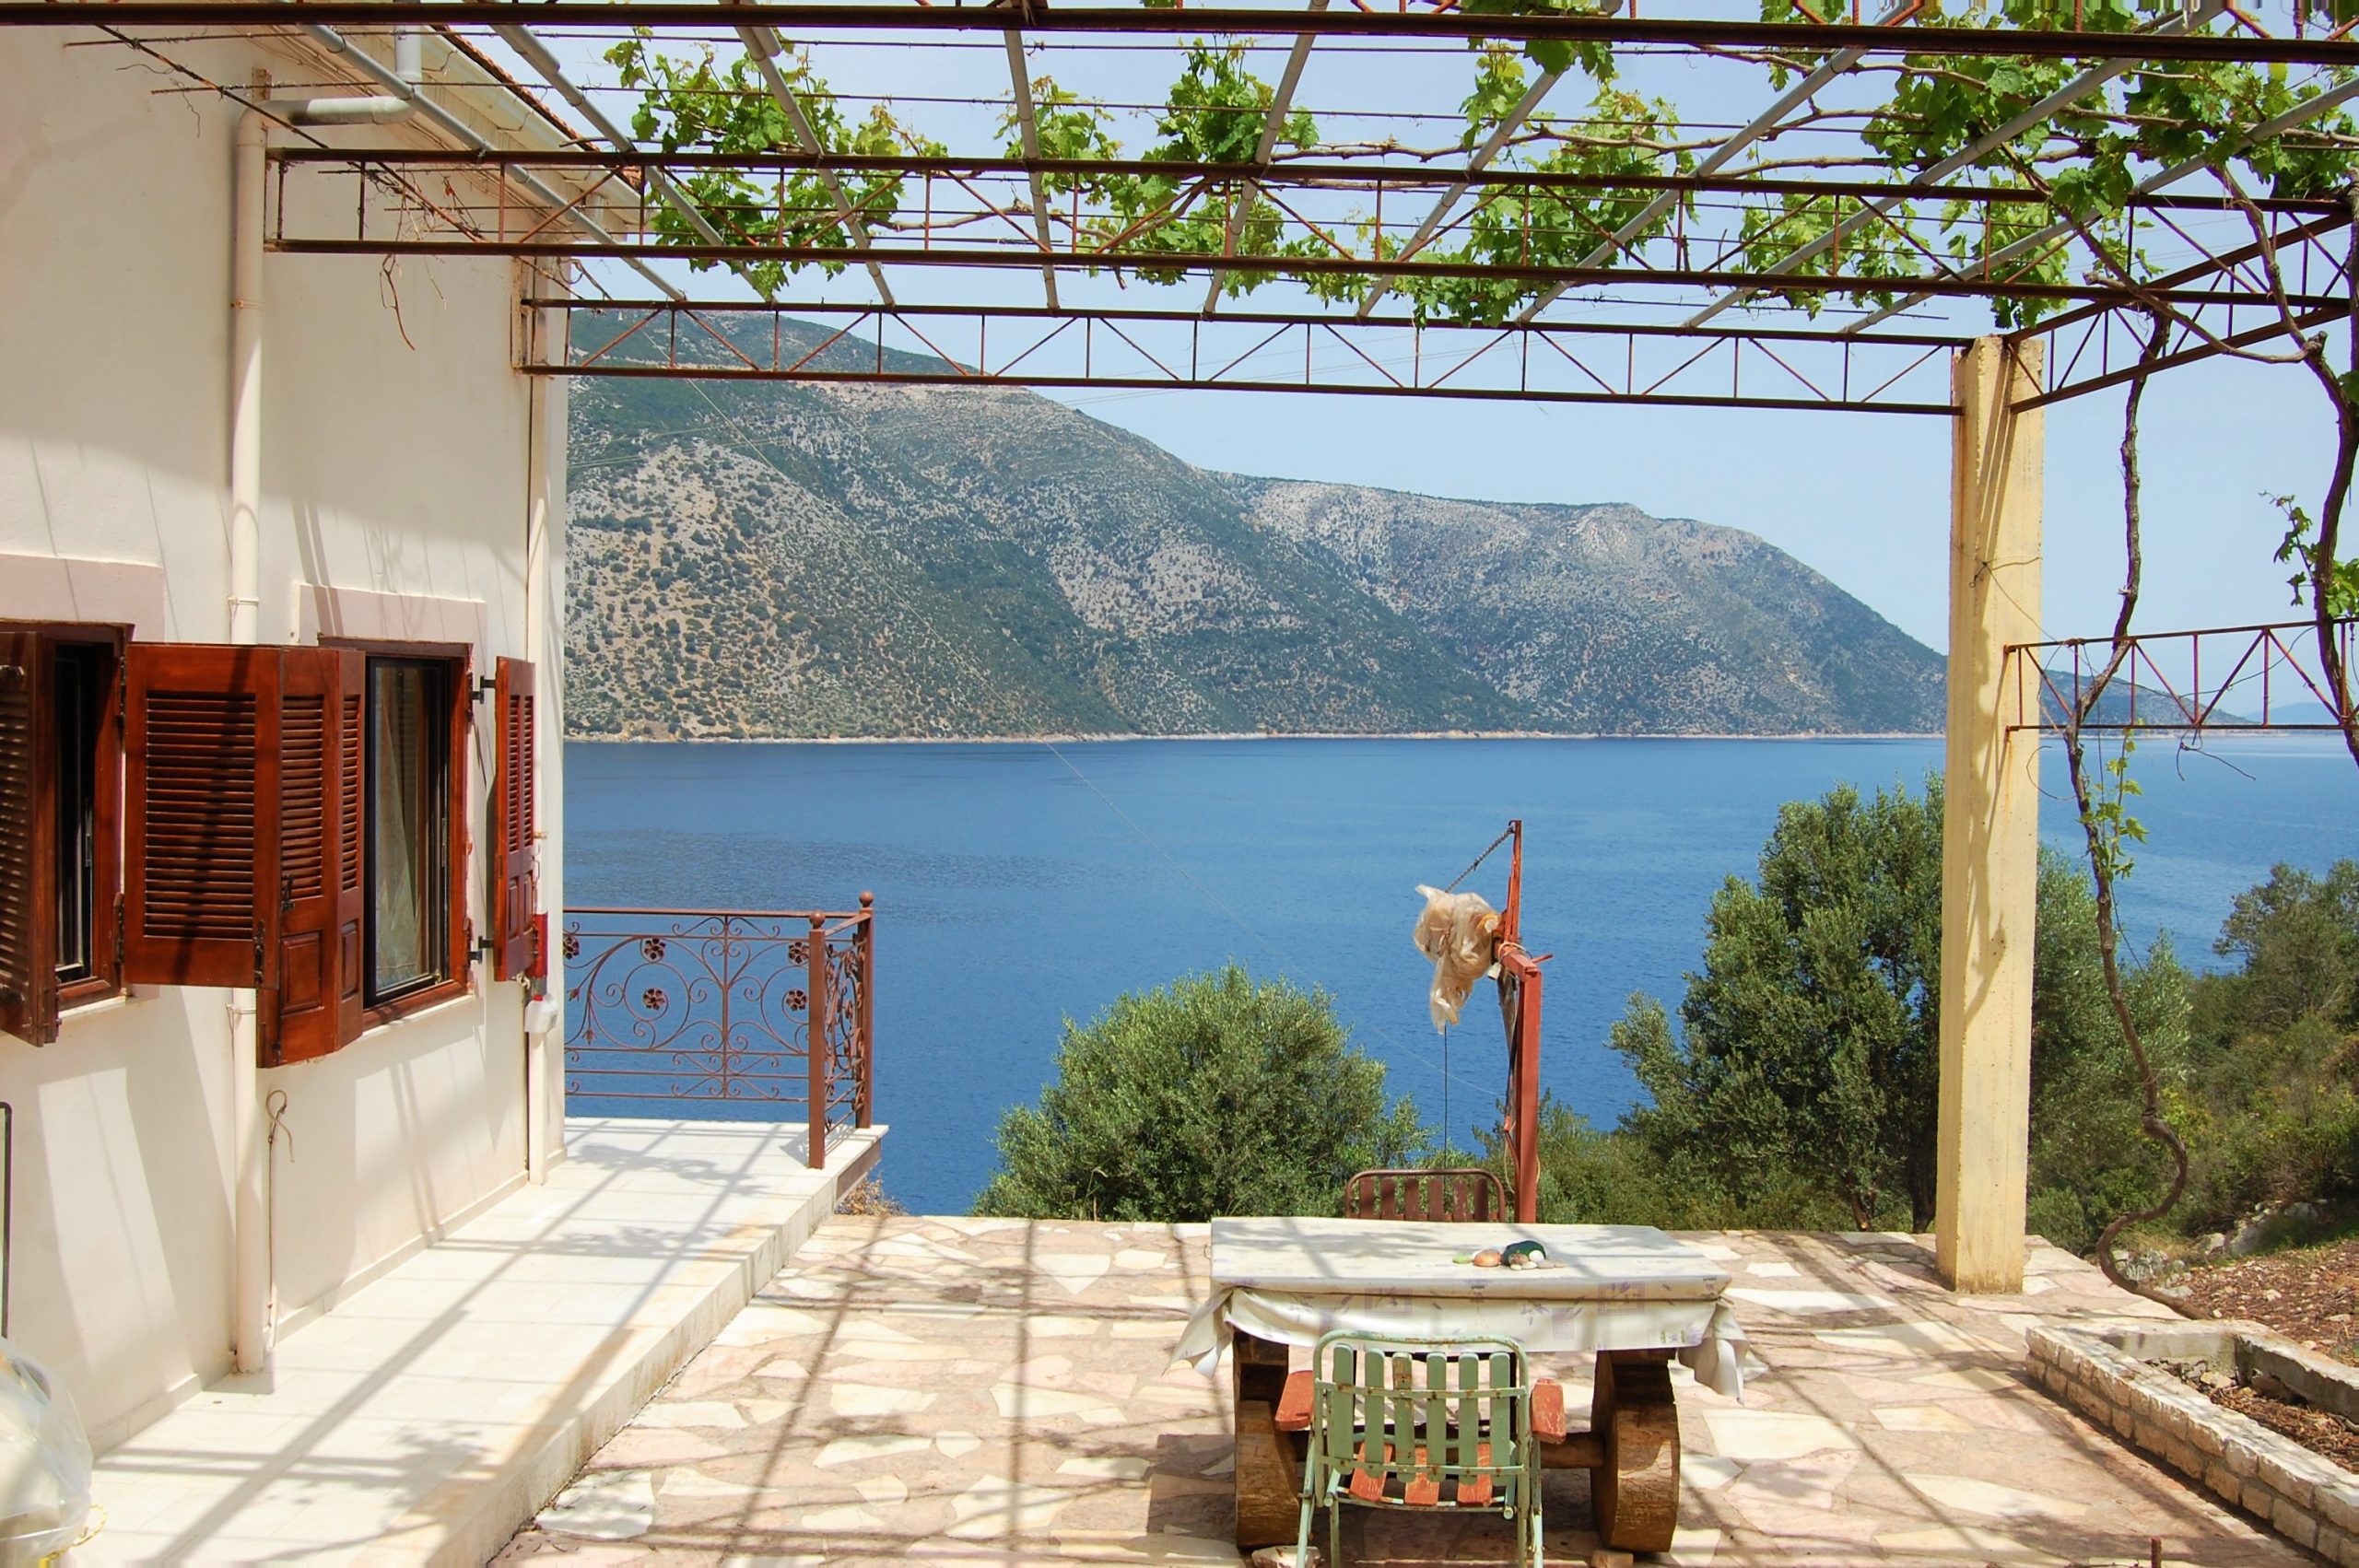 Terrace and sea view of house for sale in Ithaca Greece, Vathi/Dexa